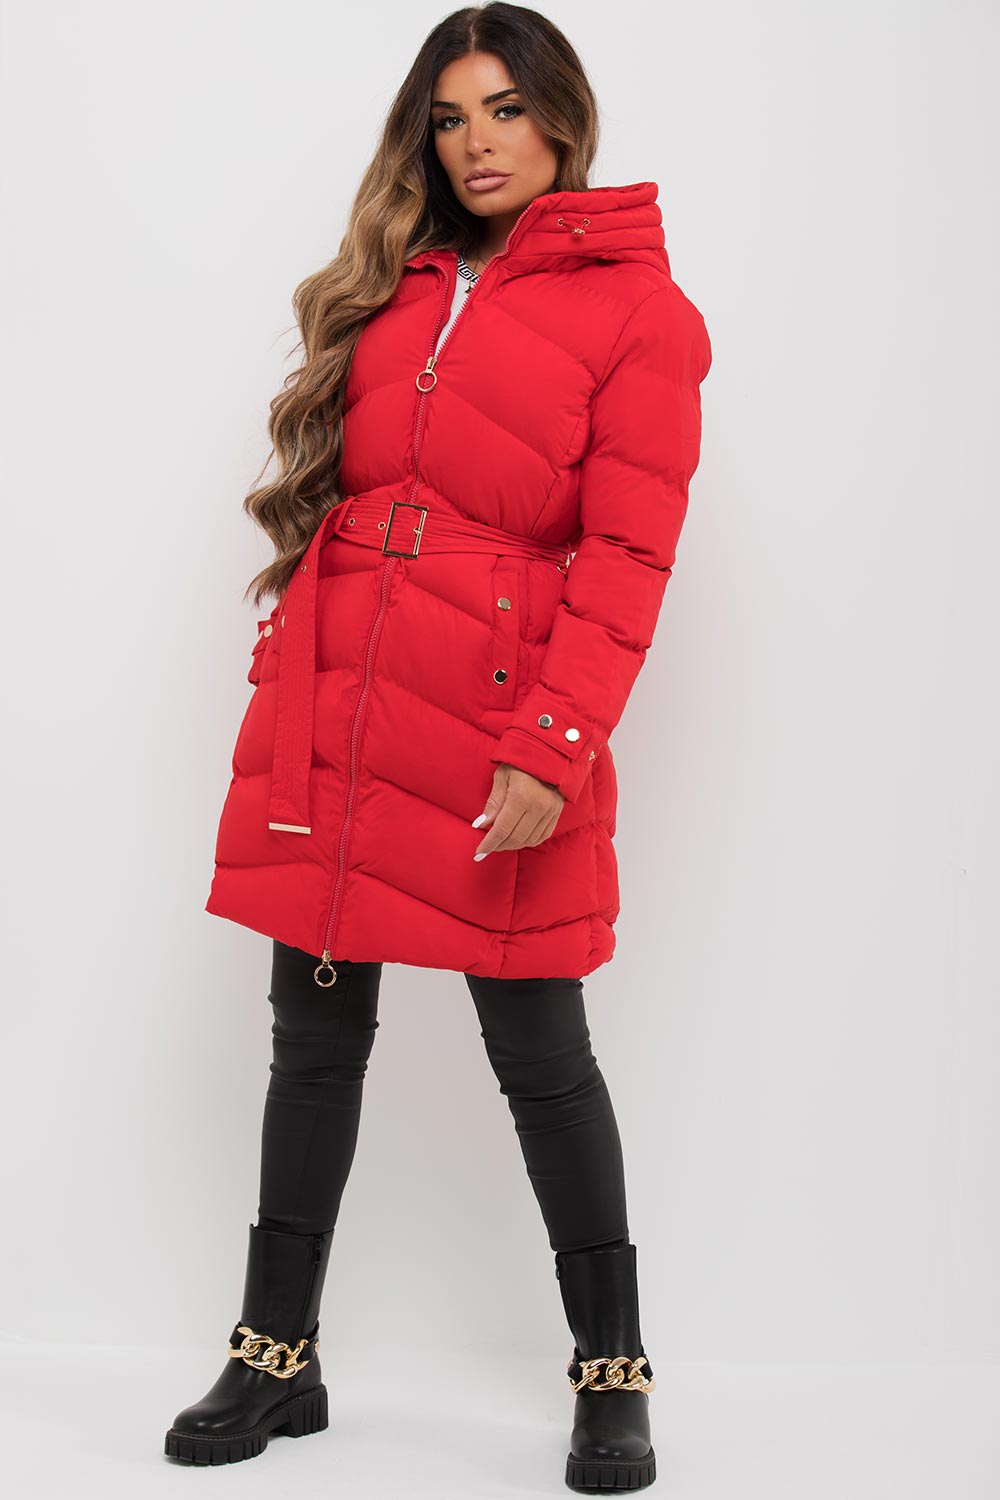 womens long padded puffer coat with belt canada goose inspired